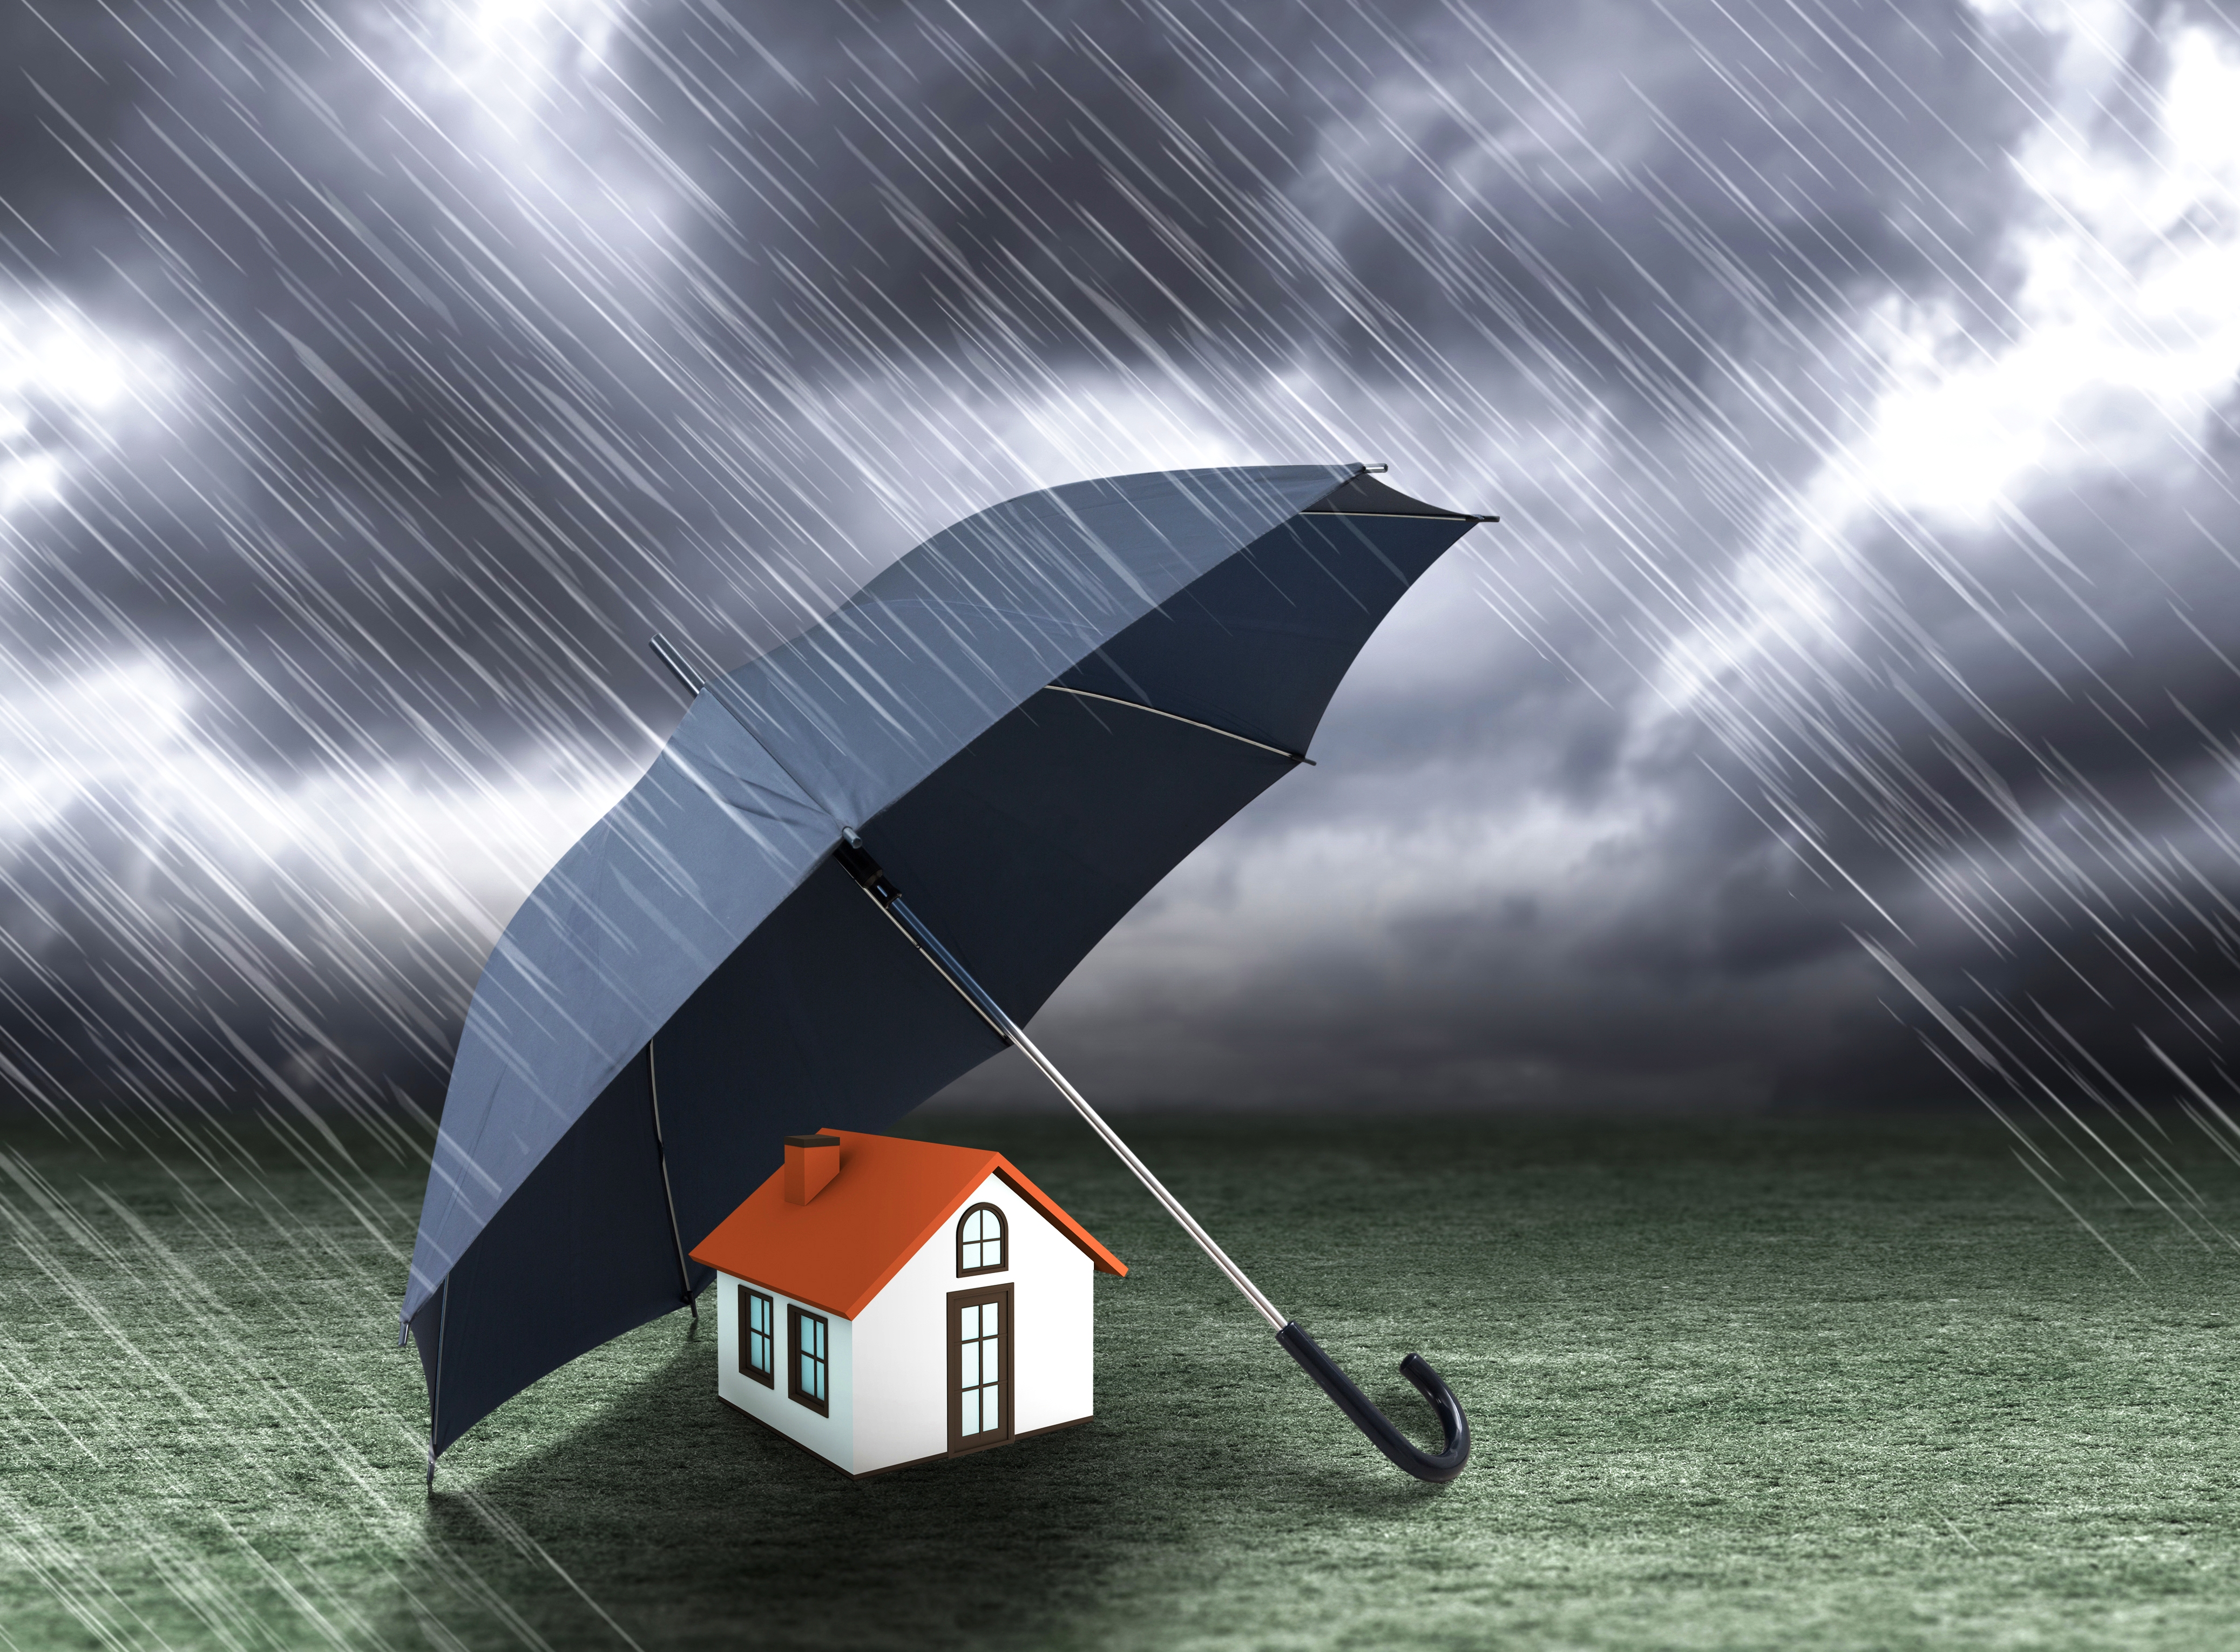 Tips to take care of your House in rainy season